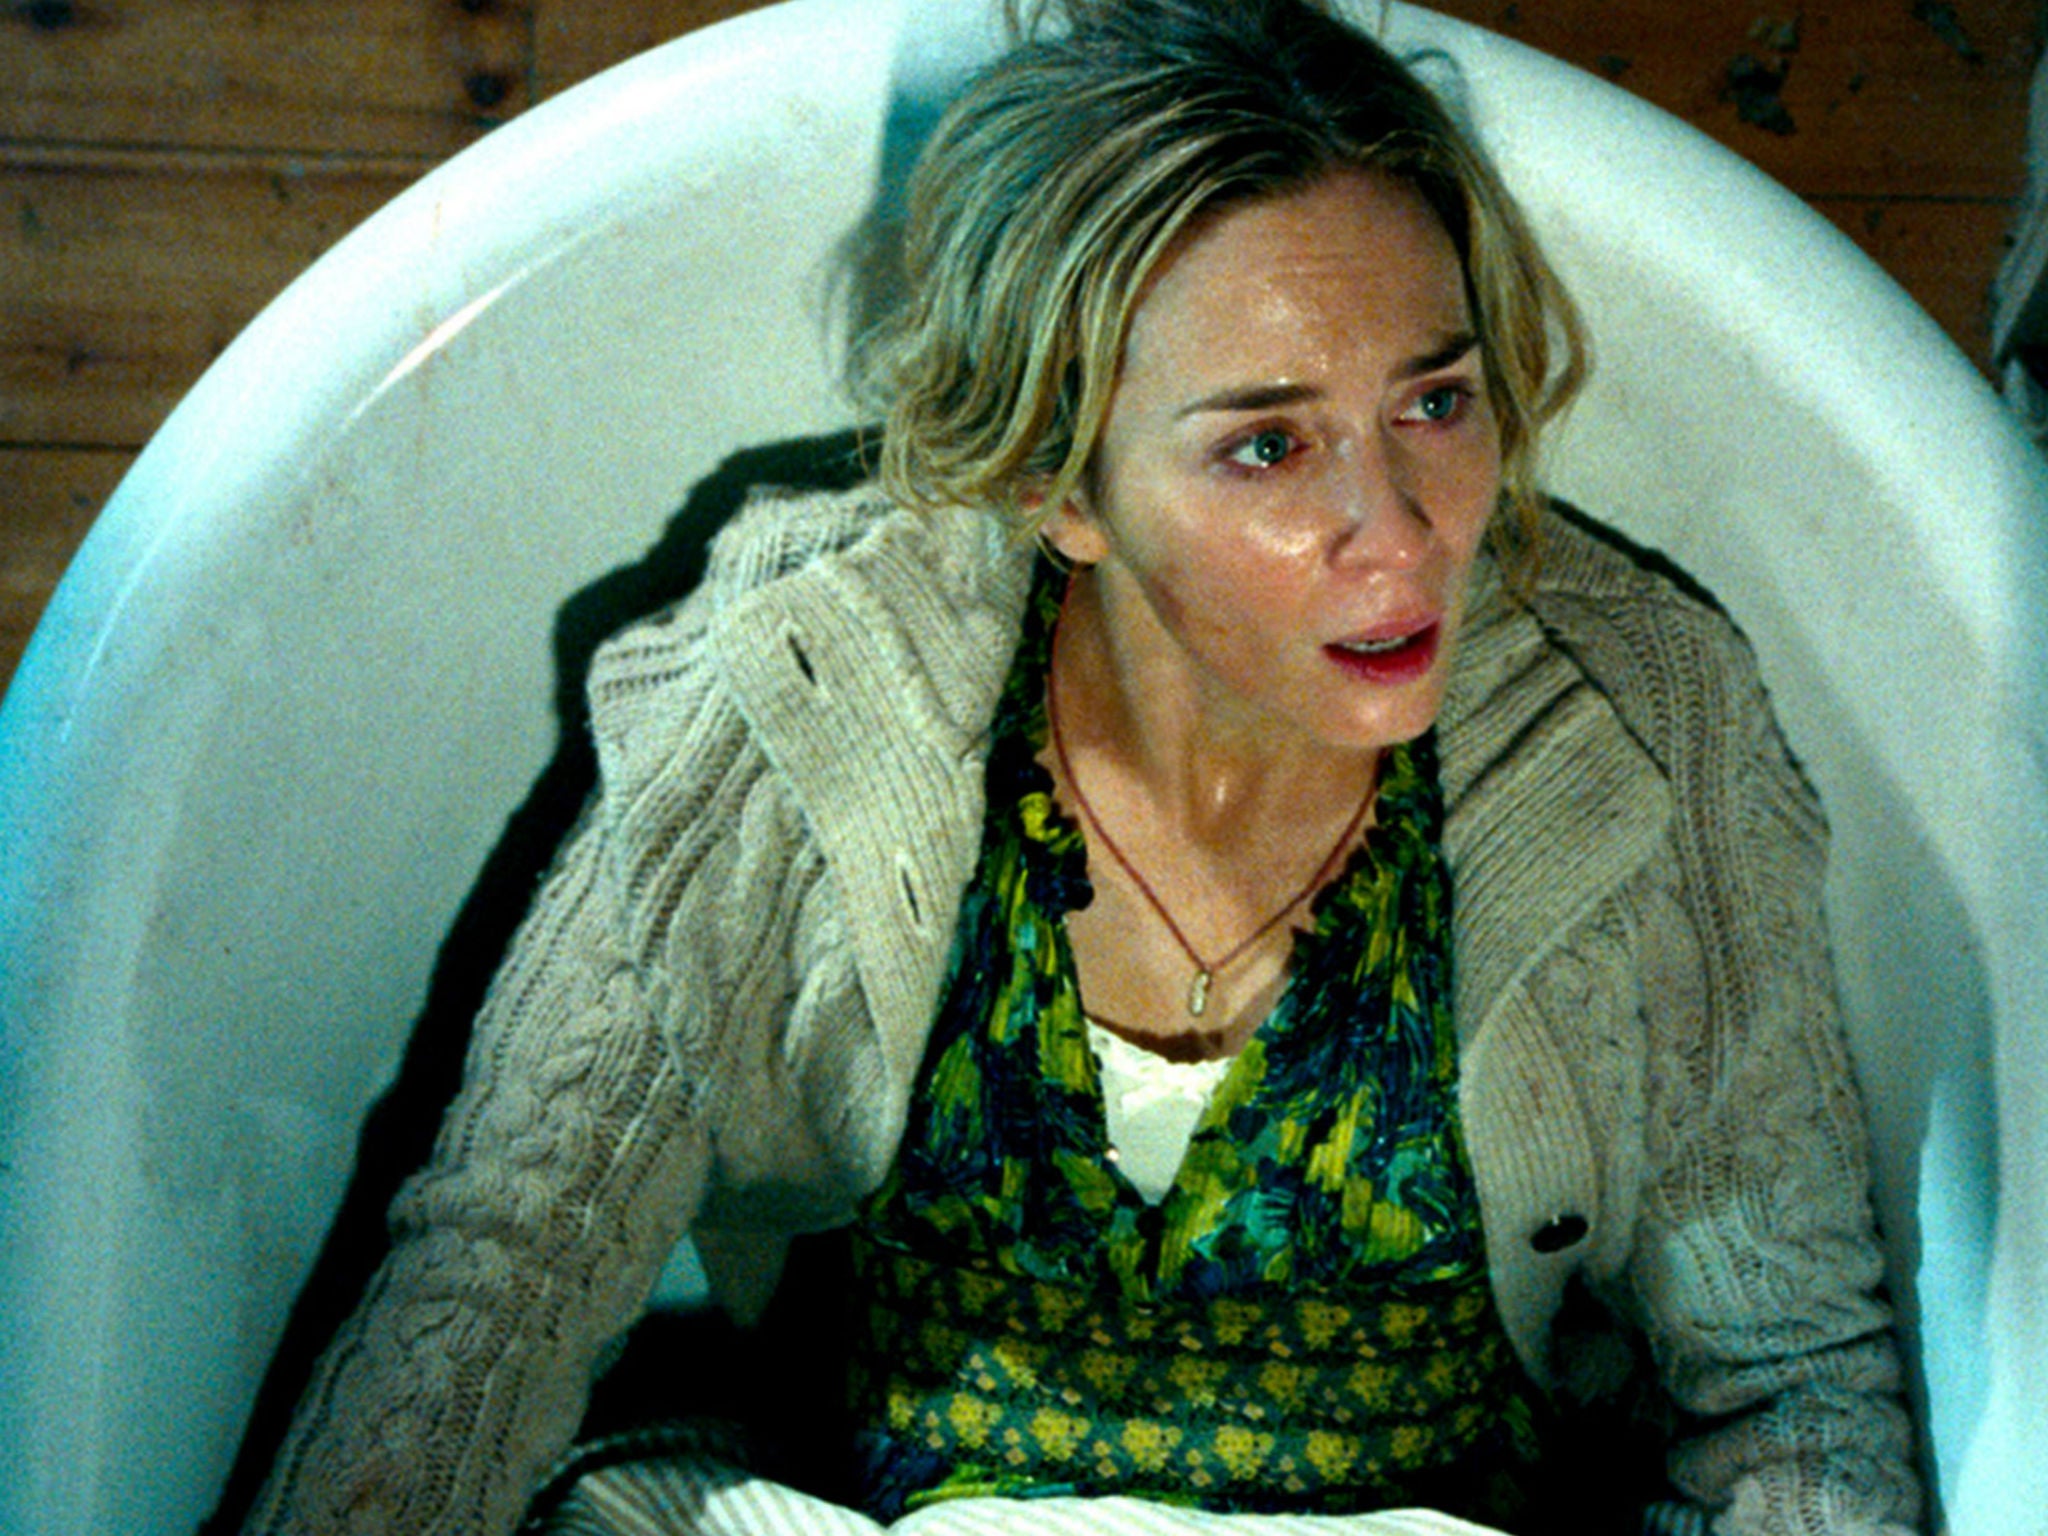 Don’t make a sound: Emily Blunt stars in ‘A Quiet Place’